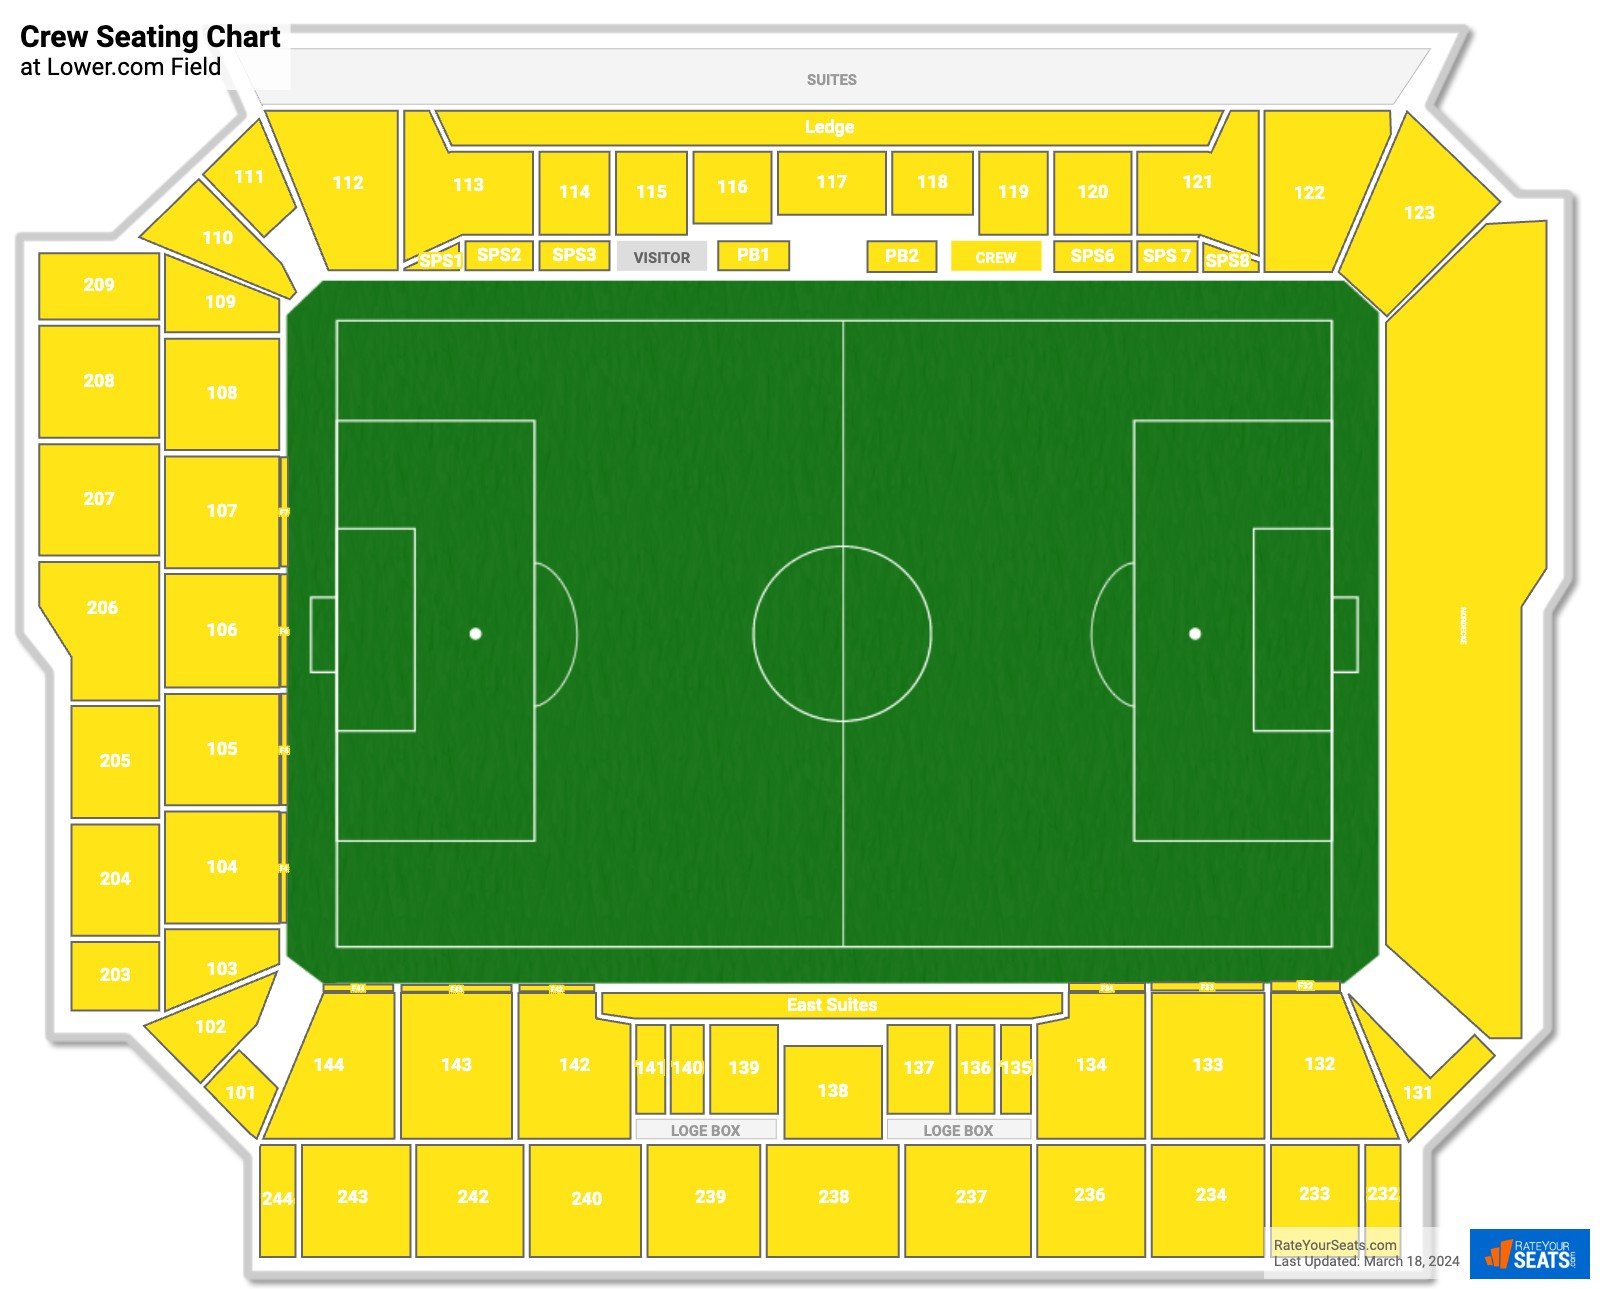 Columbus Crew Seating Chart at Lower.com Field